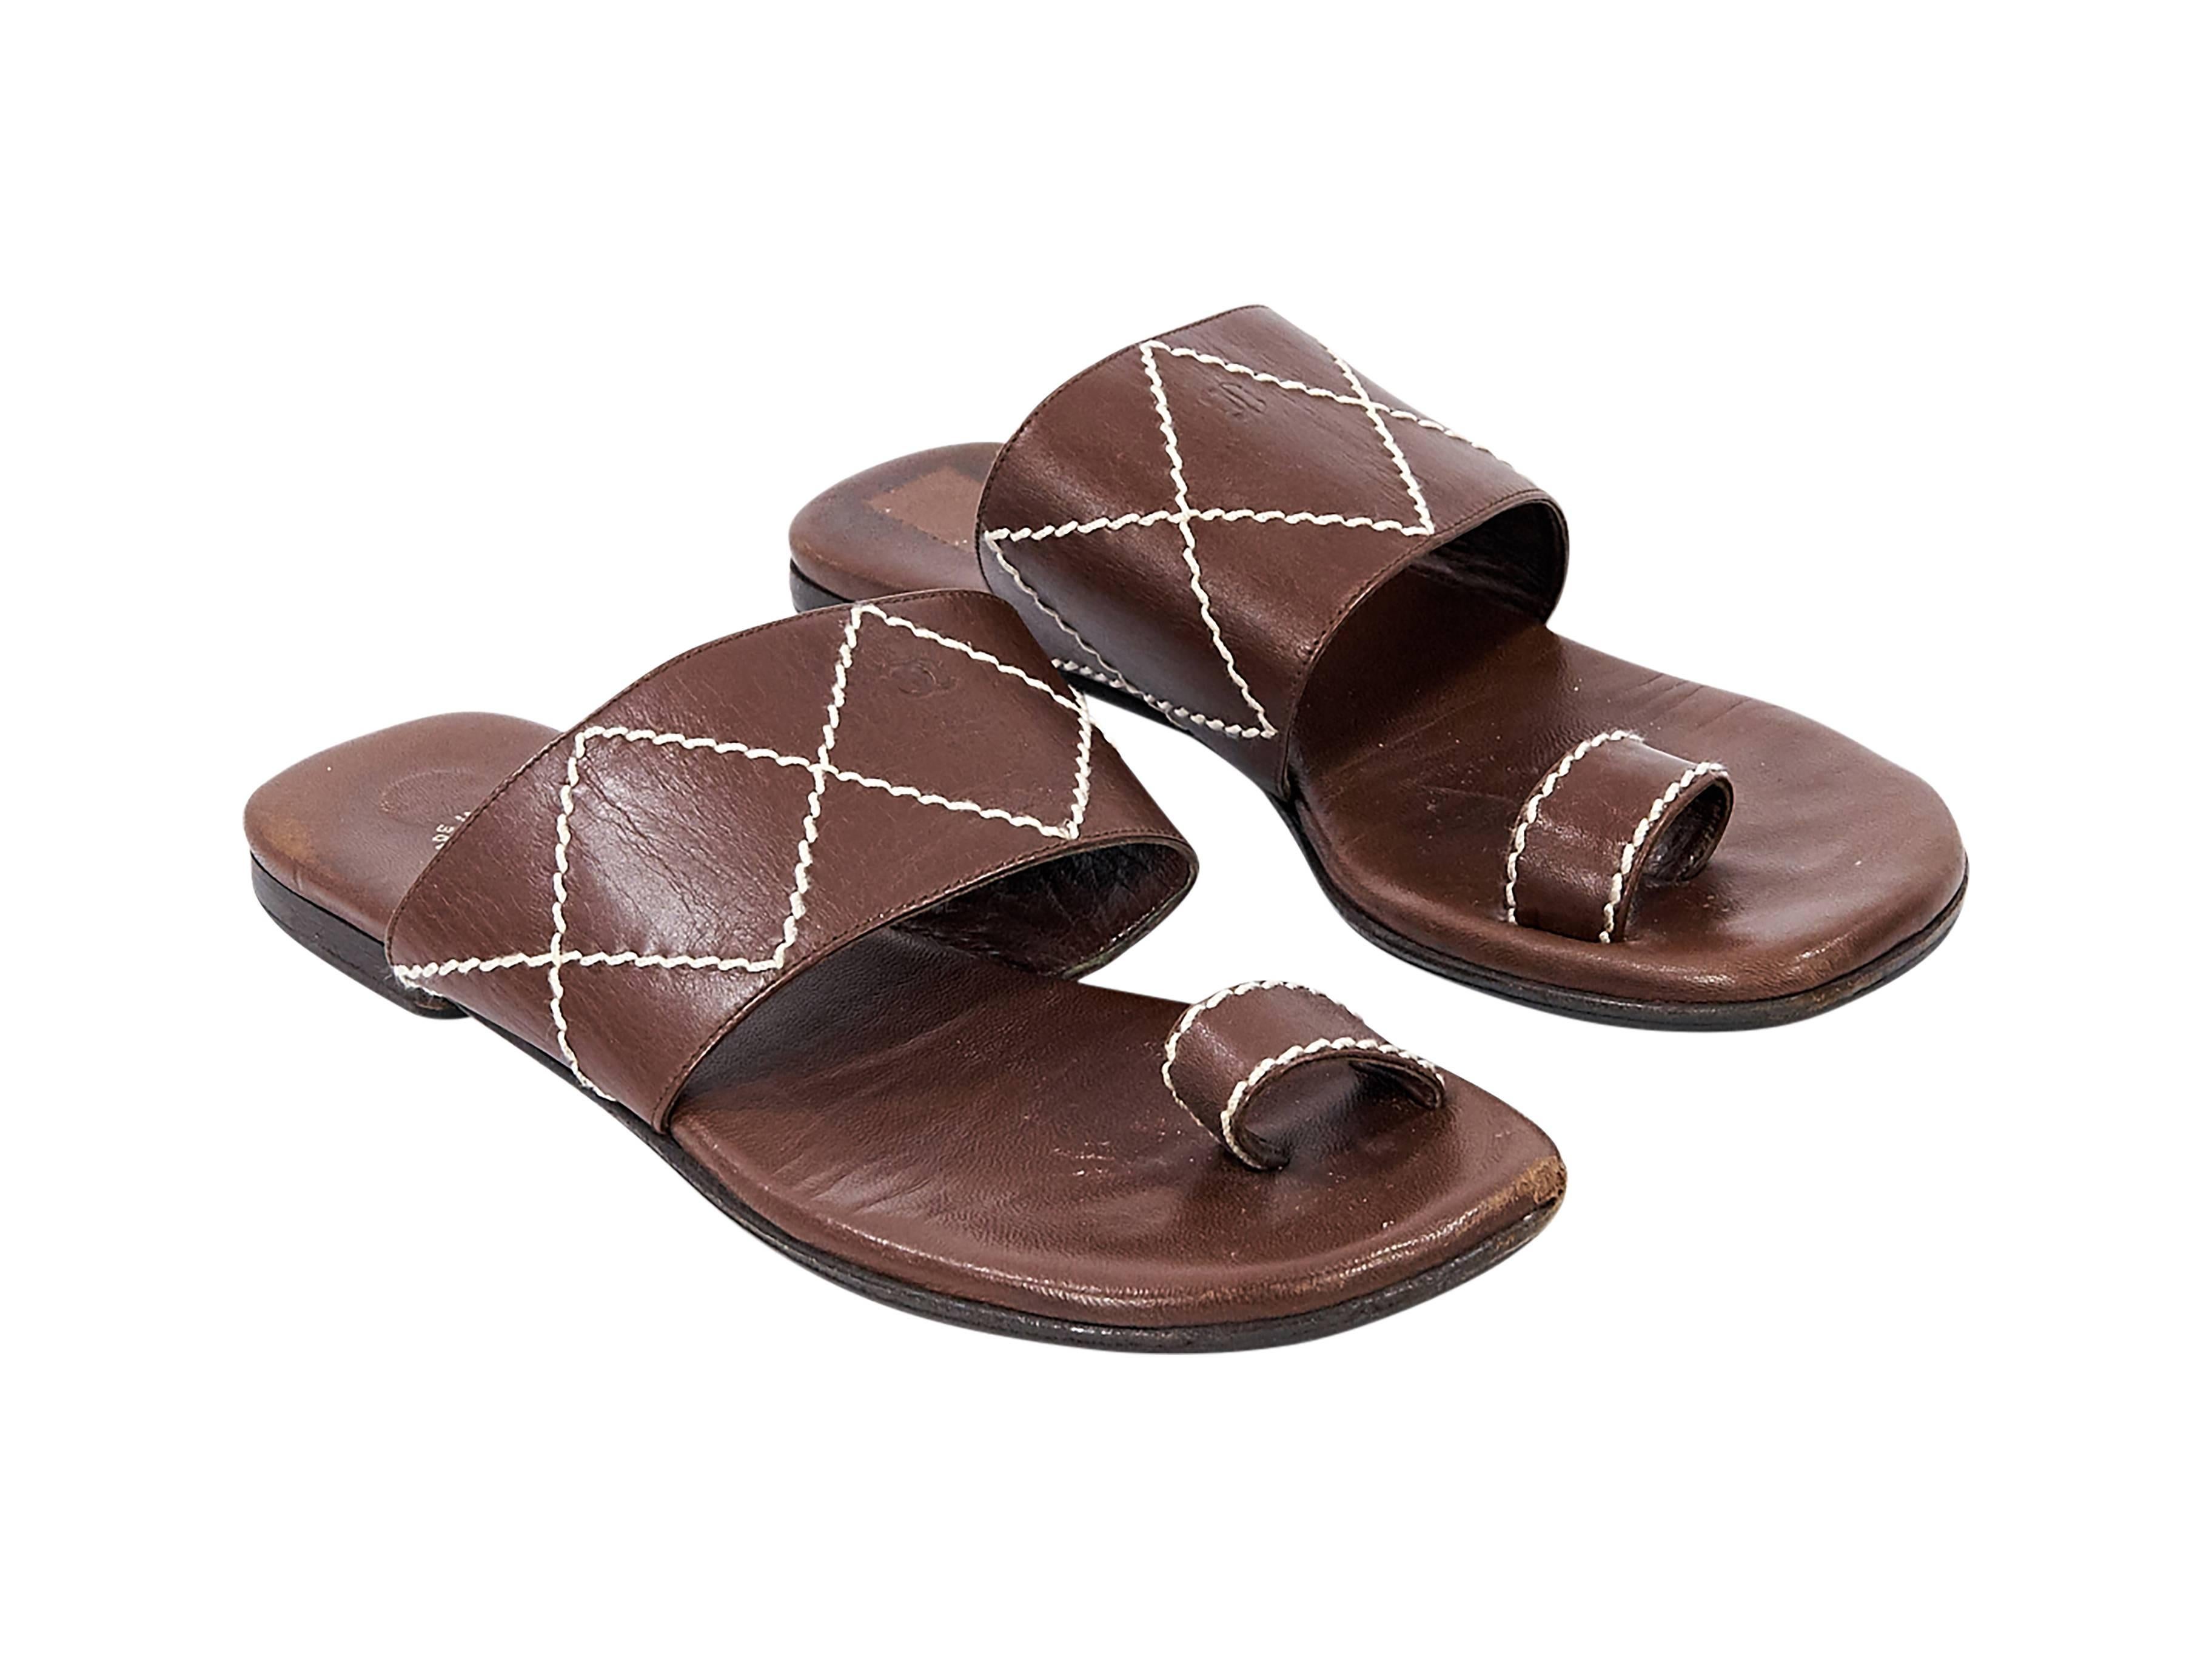 Product details: Brown leather flat sandals by Chanel. Accented with white topstitching. Toe ring. Slip-on style. 
Condition: Good. 
Est. Retail $ 1,245.00